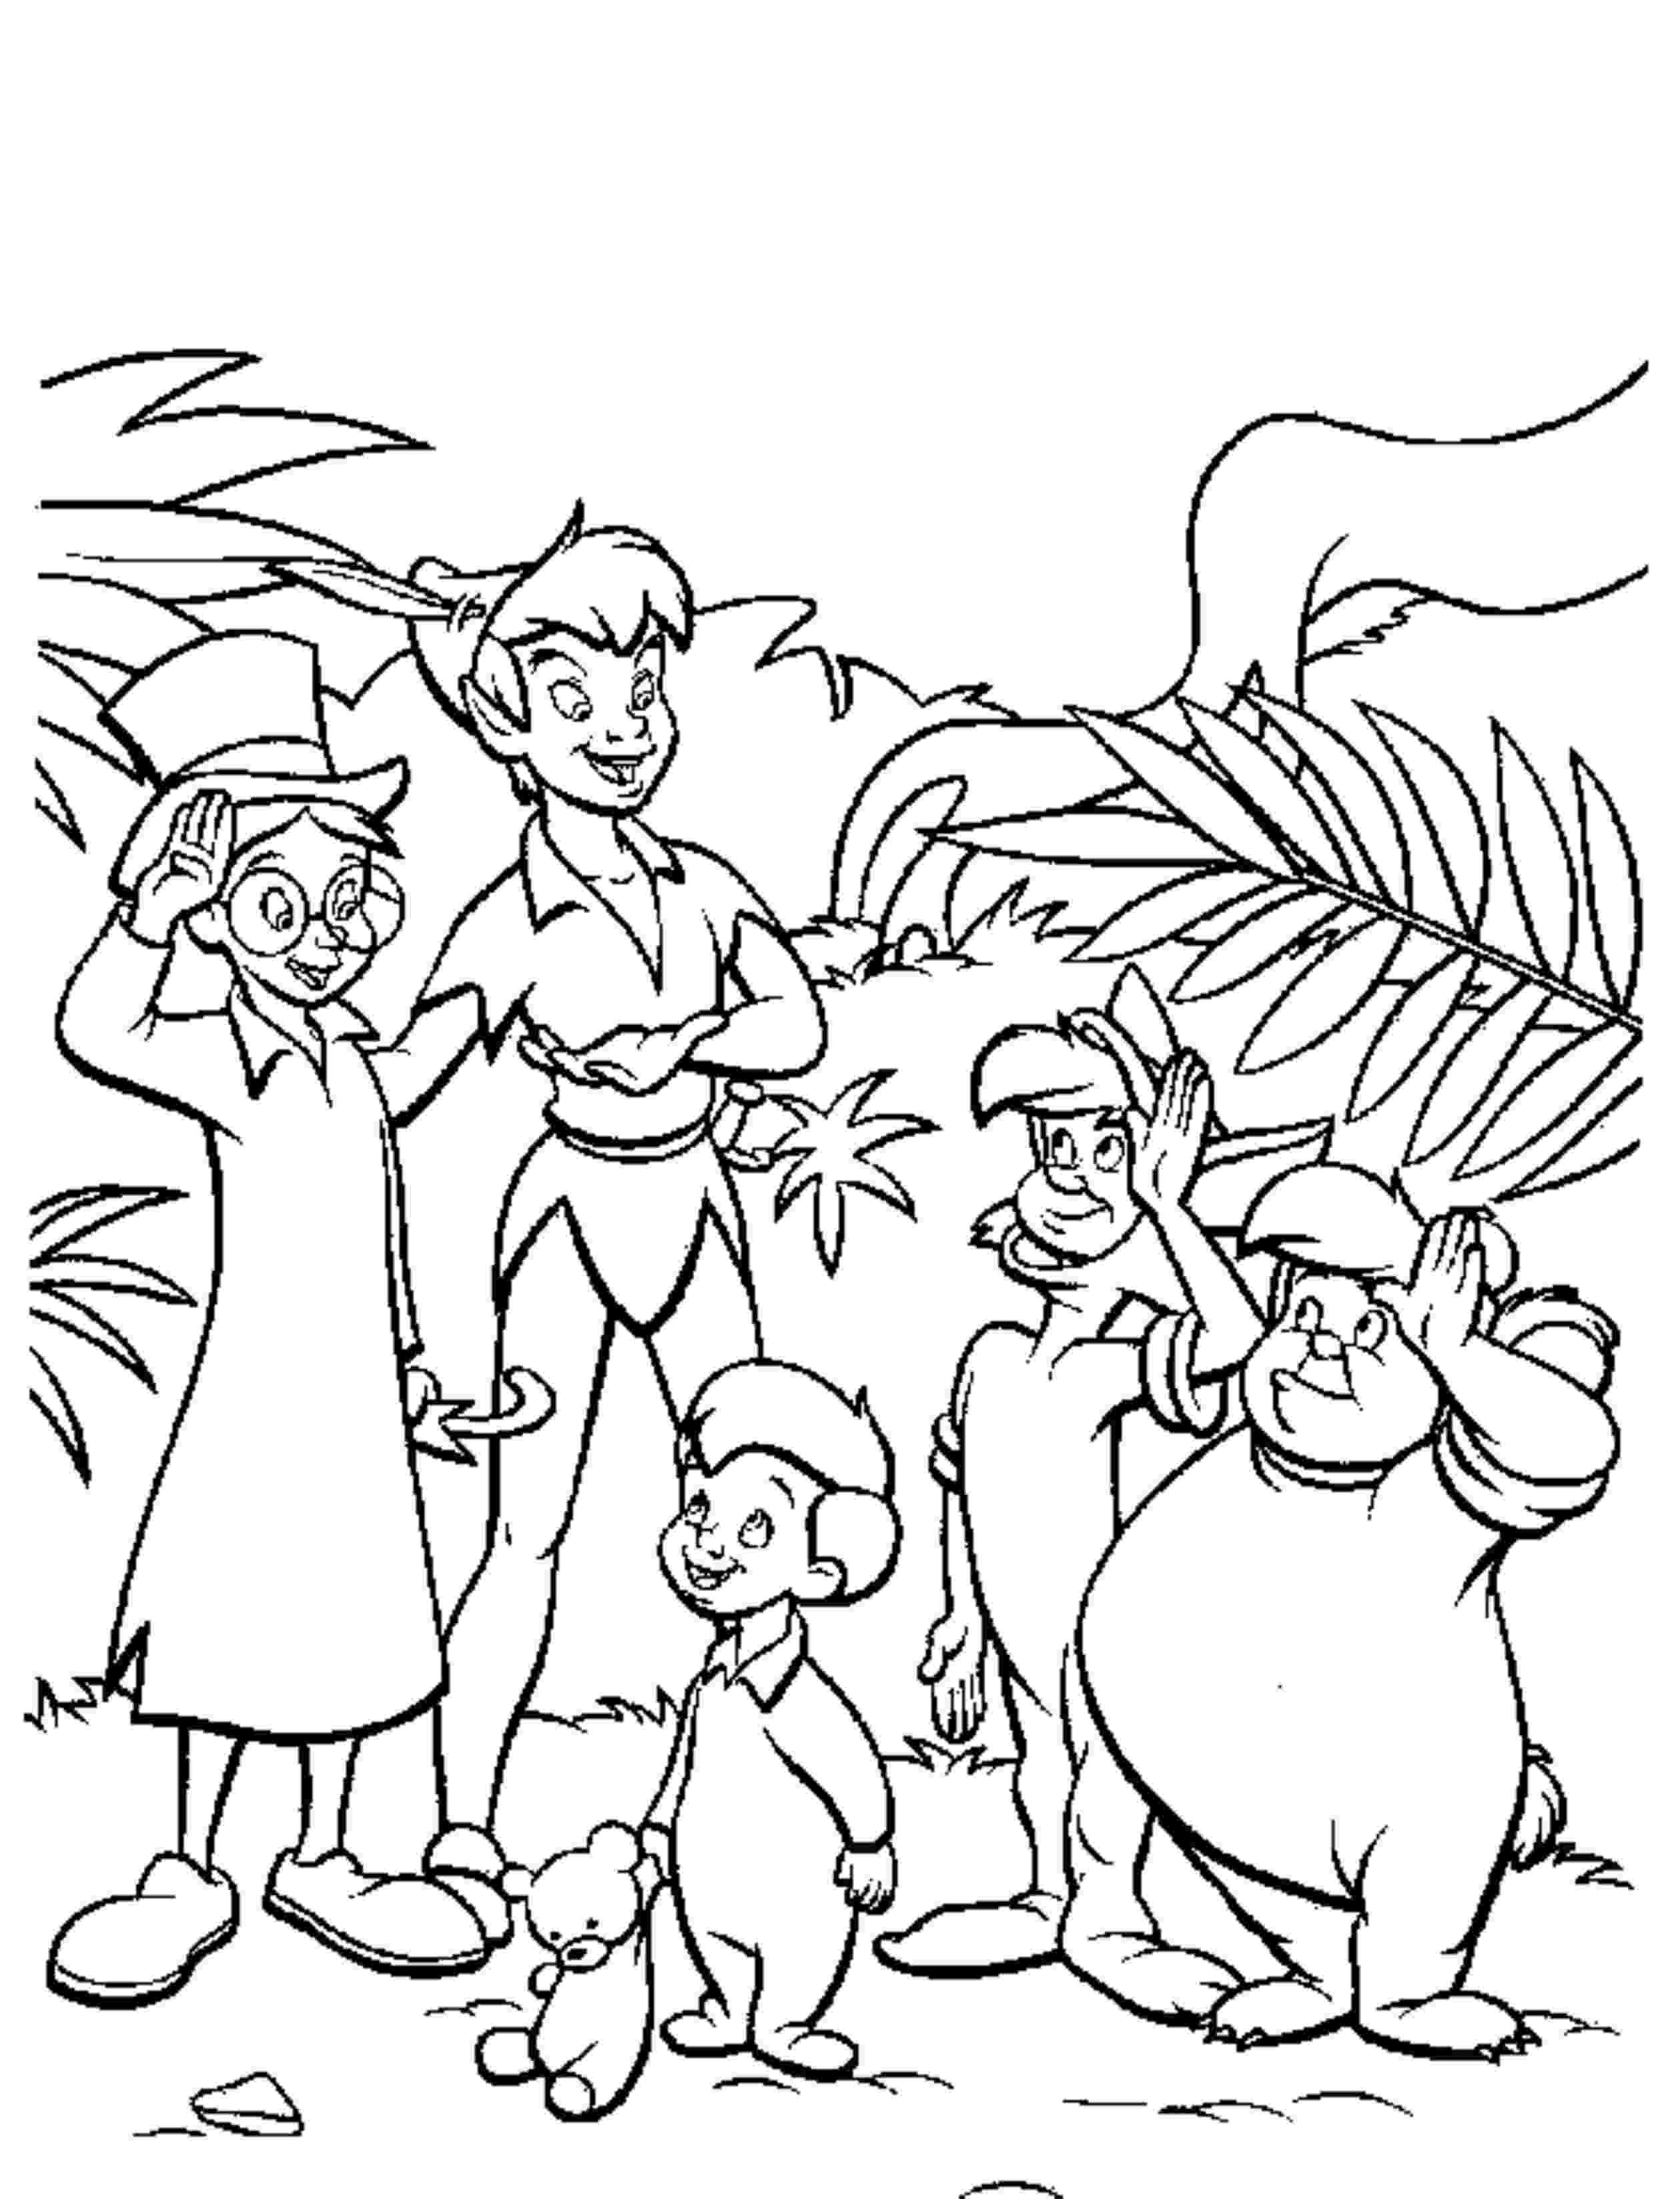 Peter Pan Coloring Pages Free - VoteForVerde.com